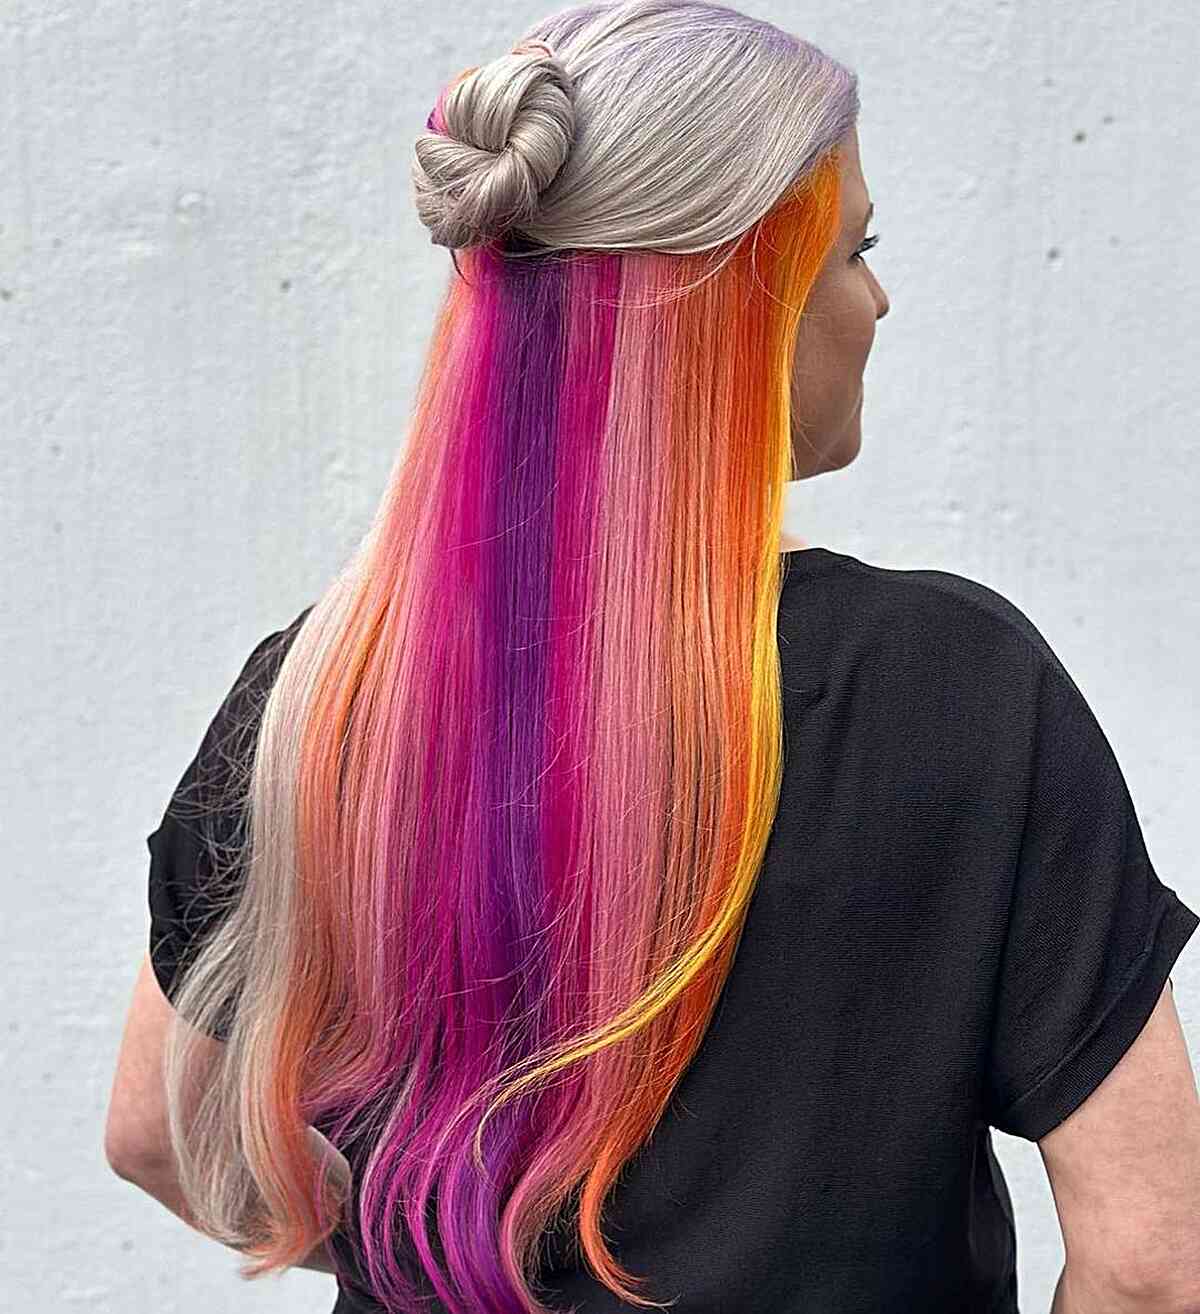 Waist-Length Blonde Hair with Colorful Underlights for Raves